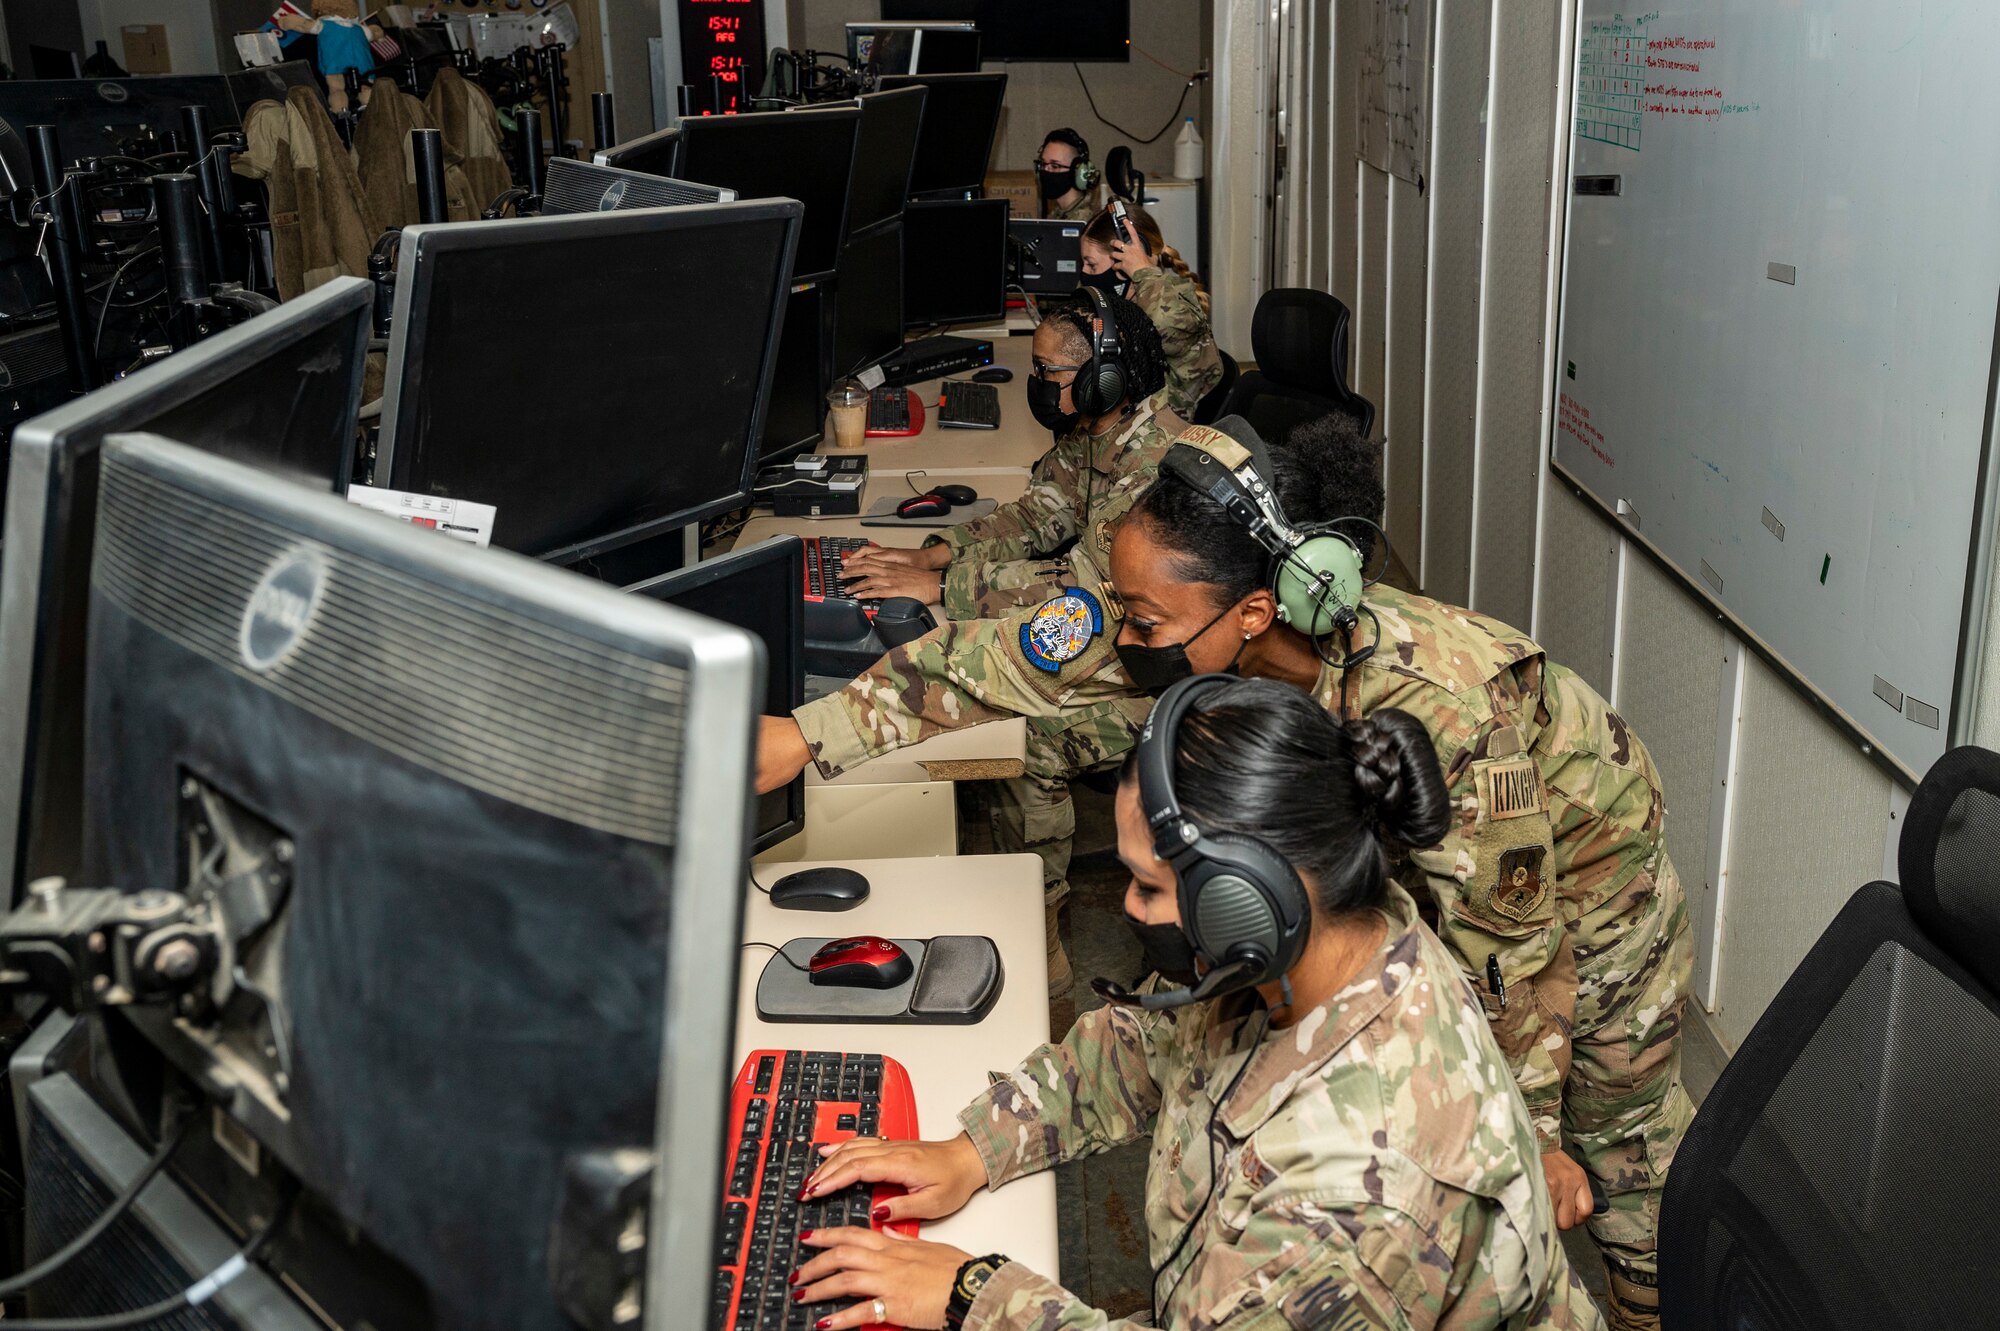 Personnel assigned to the 727th EACS, or “Kingpin,” conducted an all-women mission in celebration of Women’s History Month. (U.S. Air Force photo by Staff Sgt. Miranda A. Loera)